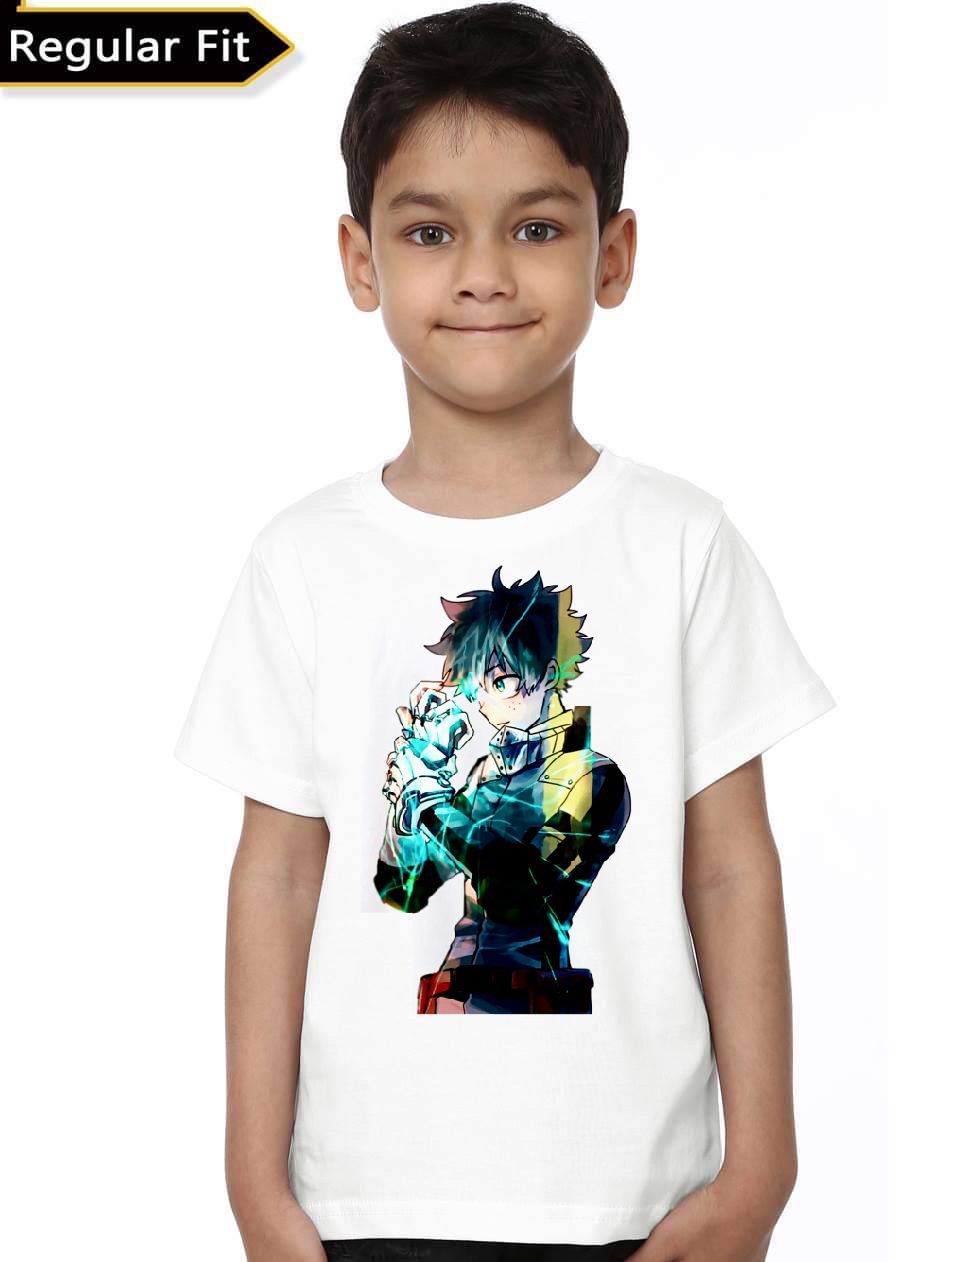 Anime Lover Stylish T shirt for Kids Boys and Girls